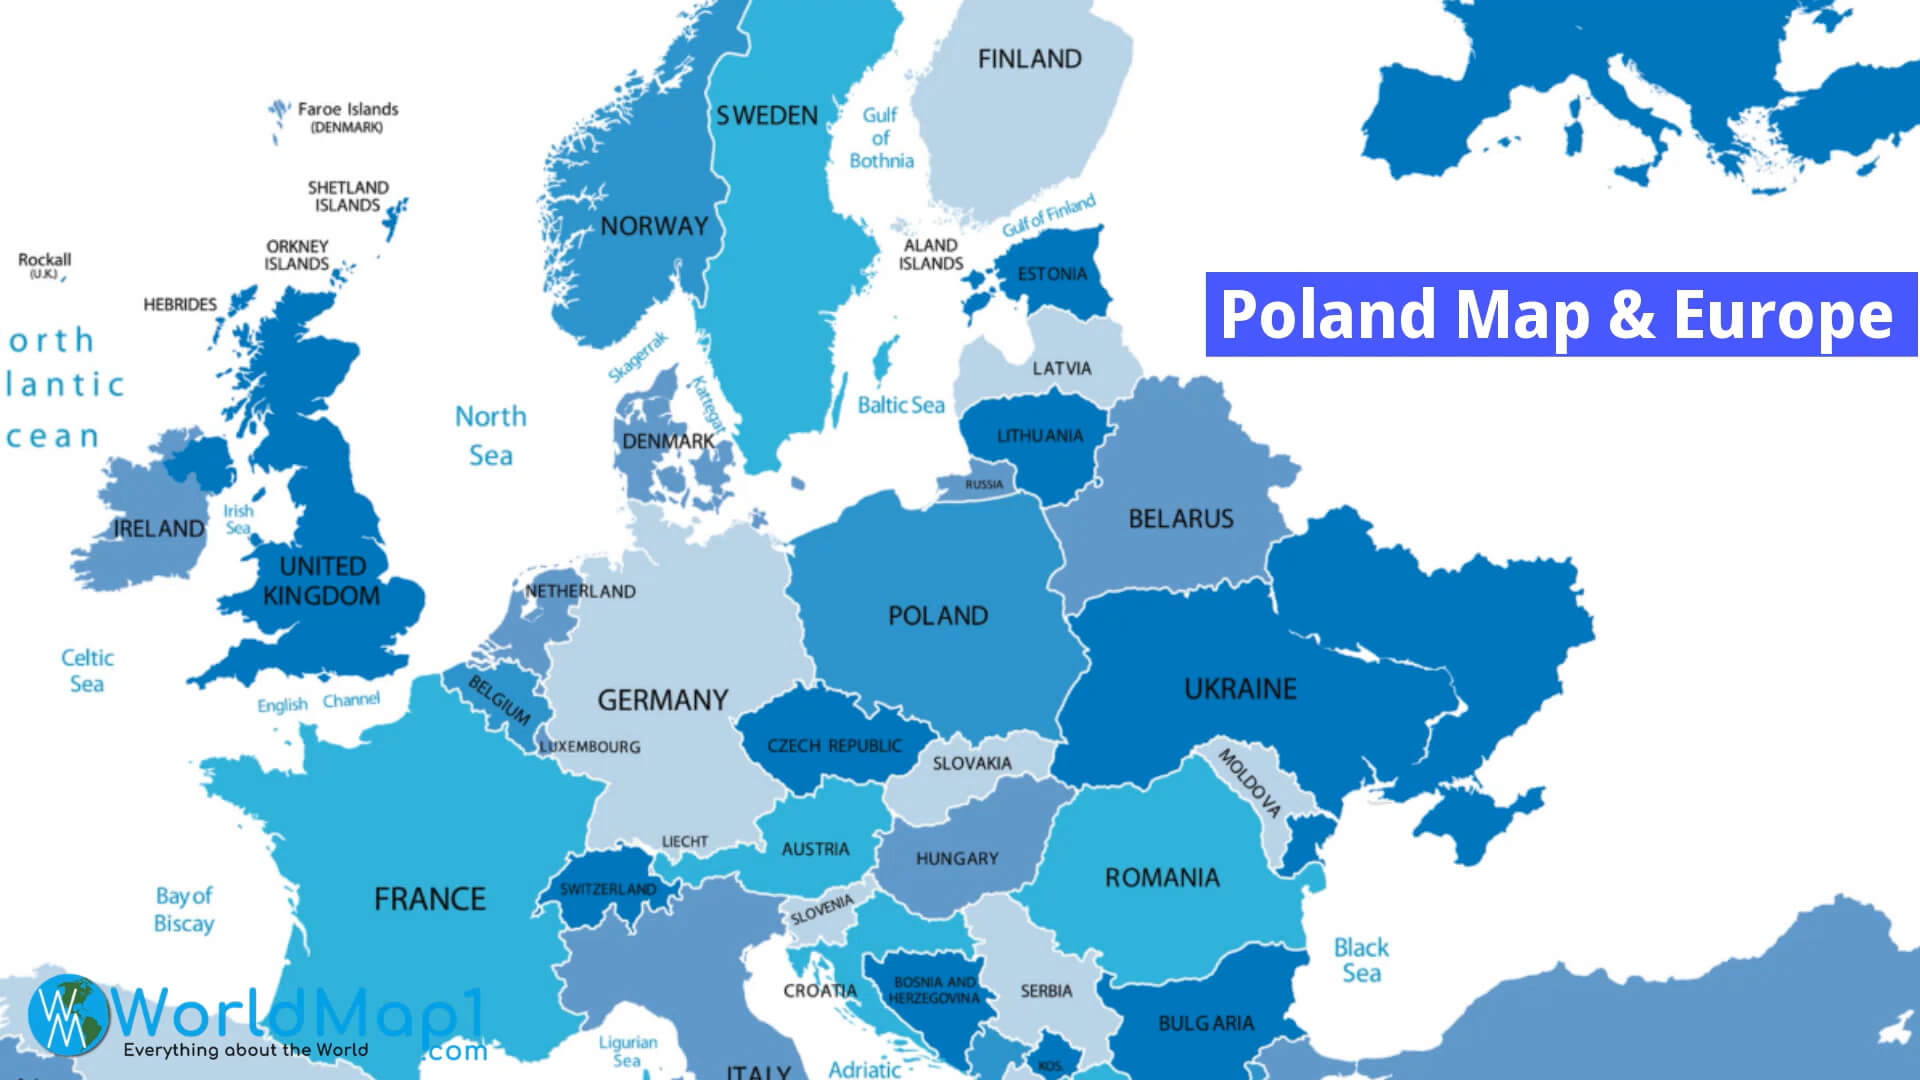 Poland Map and Europe